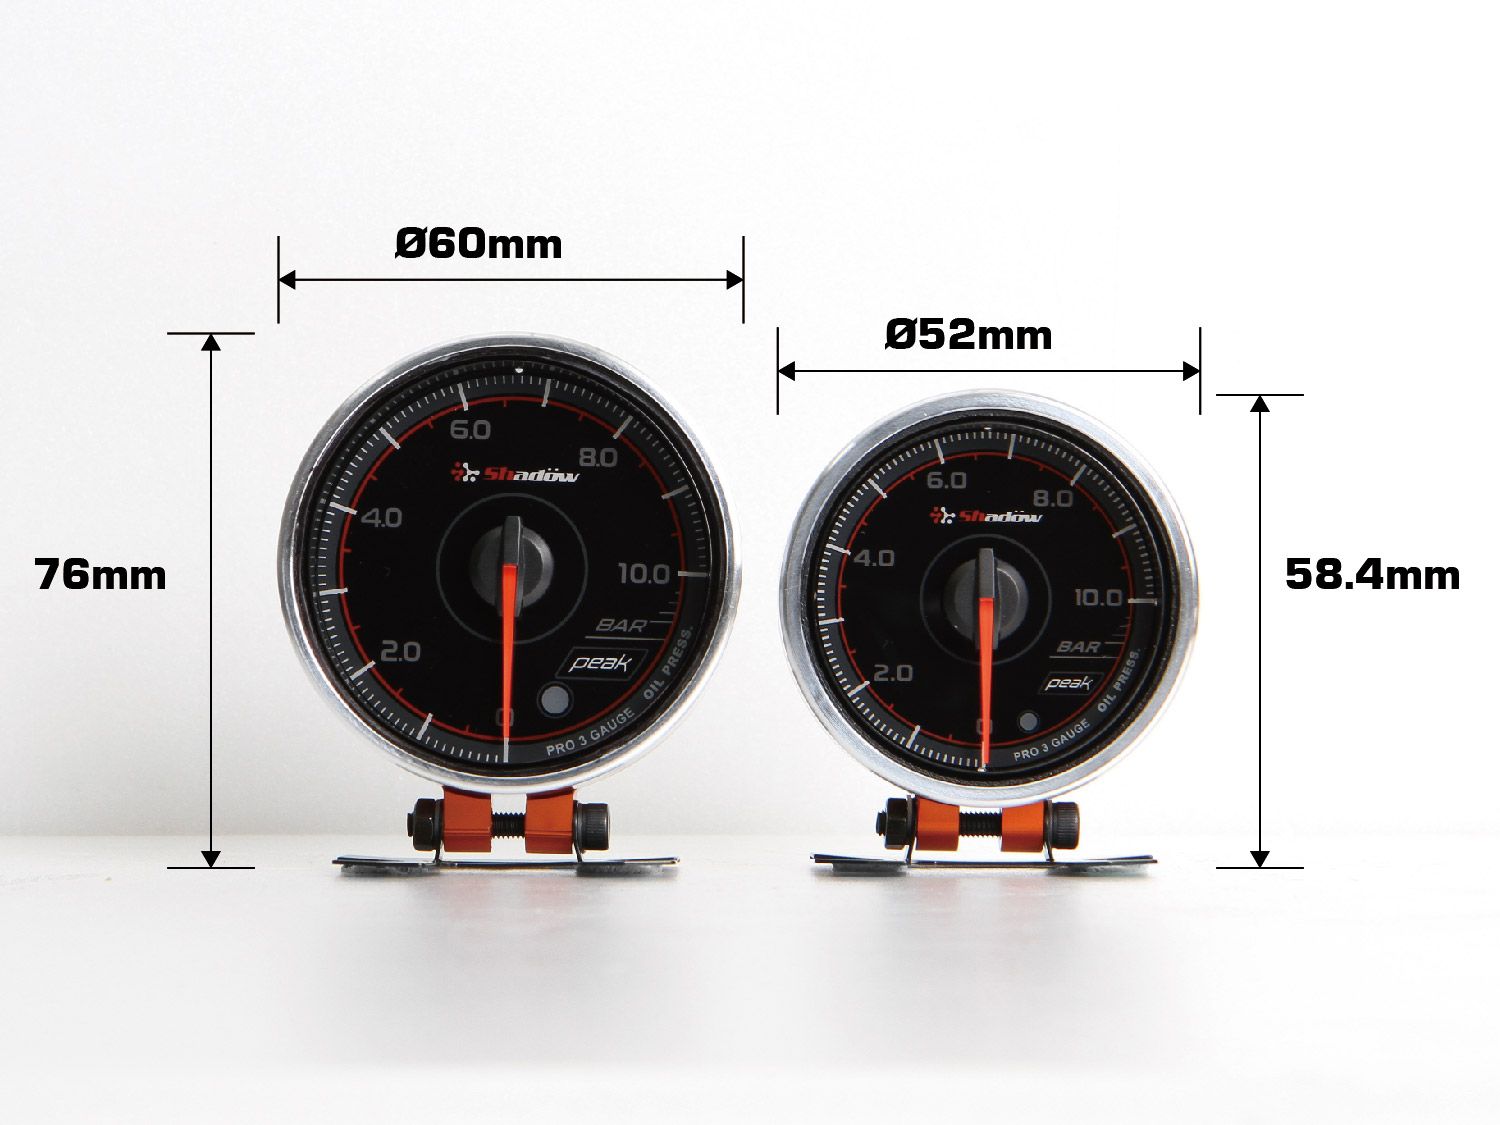 Shadow PRO3 racing gauge The racing watch comes in two Specifications